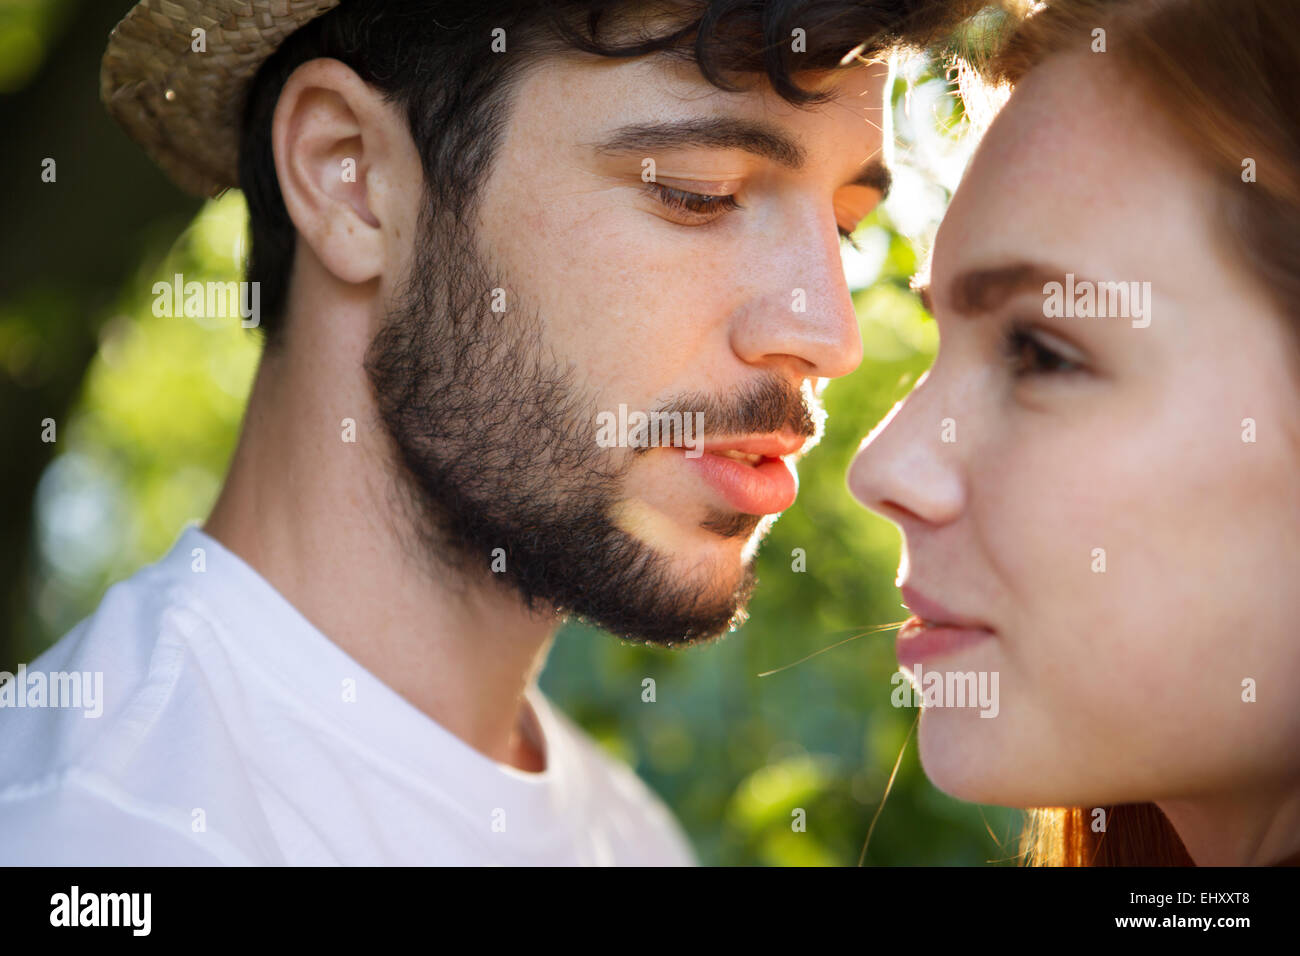 Young couple sharing an intimate moment outdoors Stock Photo